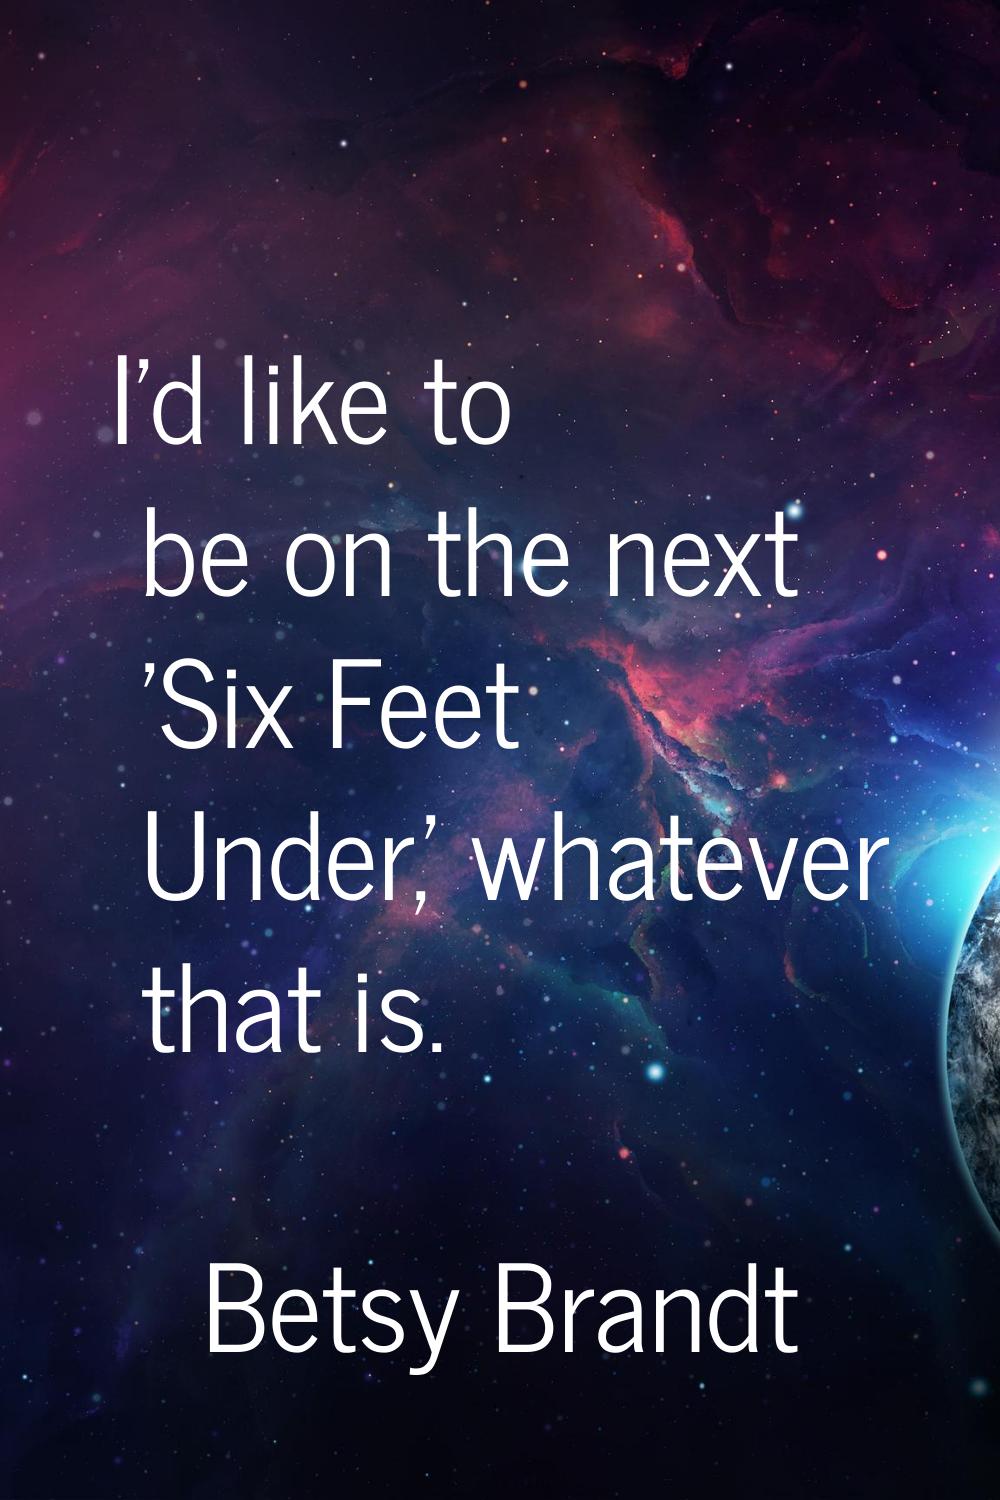 I'd like to be on the next 'Six Feet Under,' whatever that is.